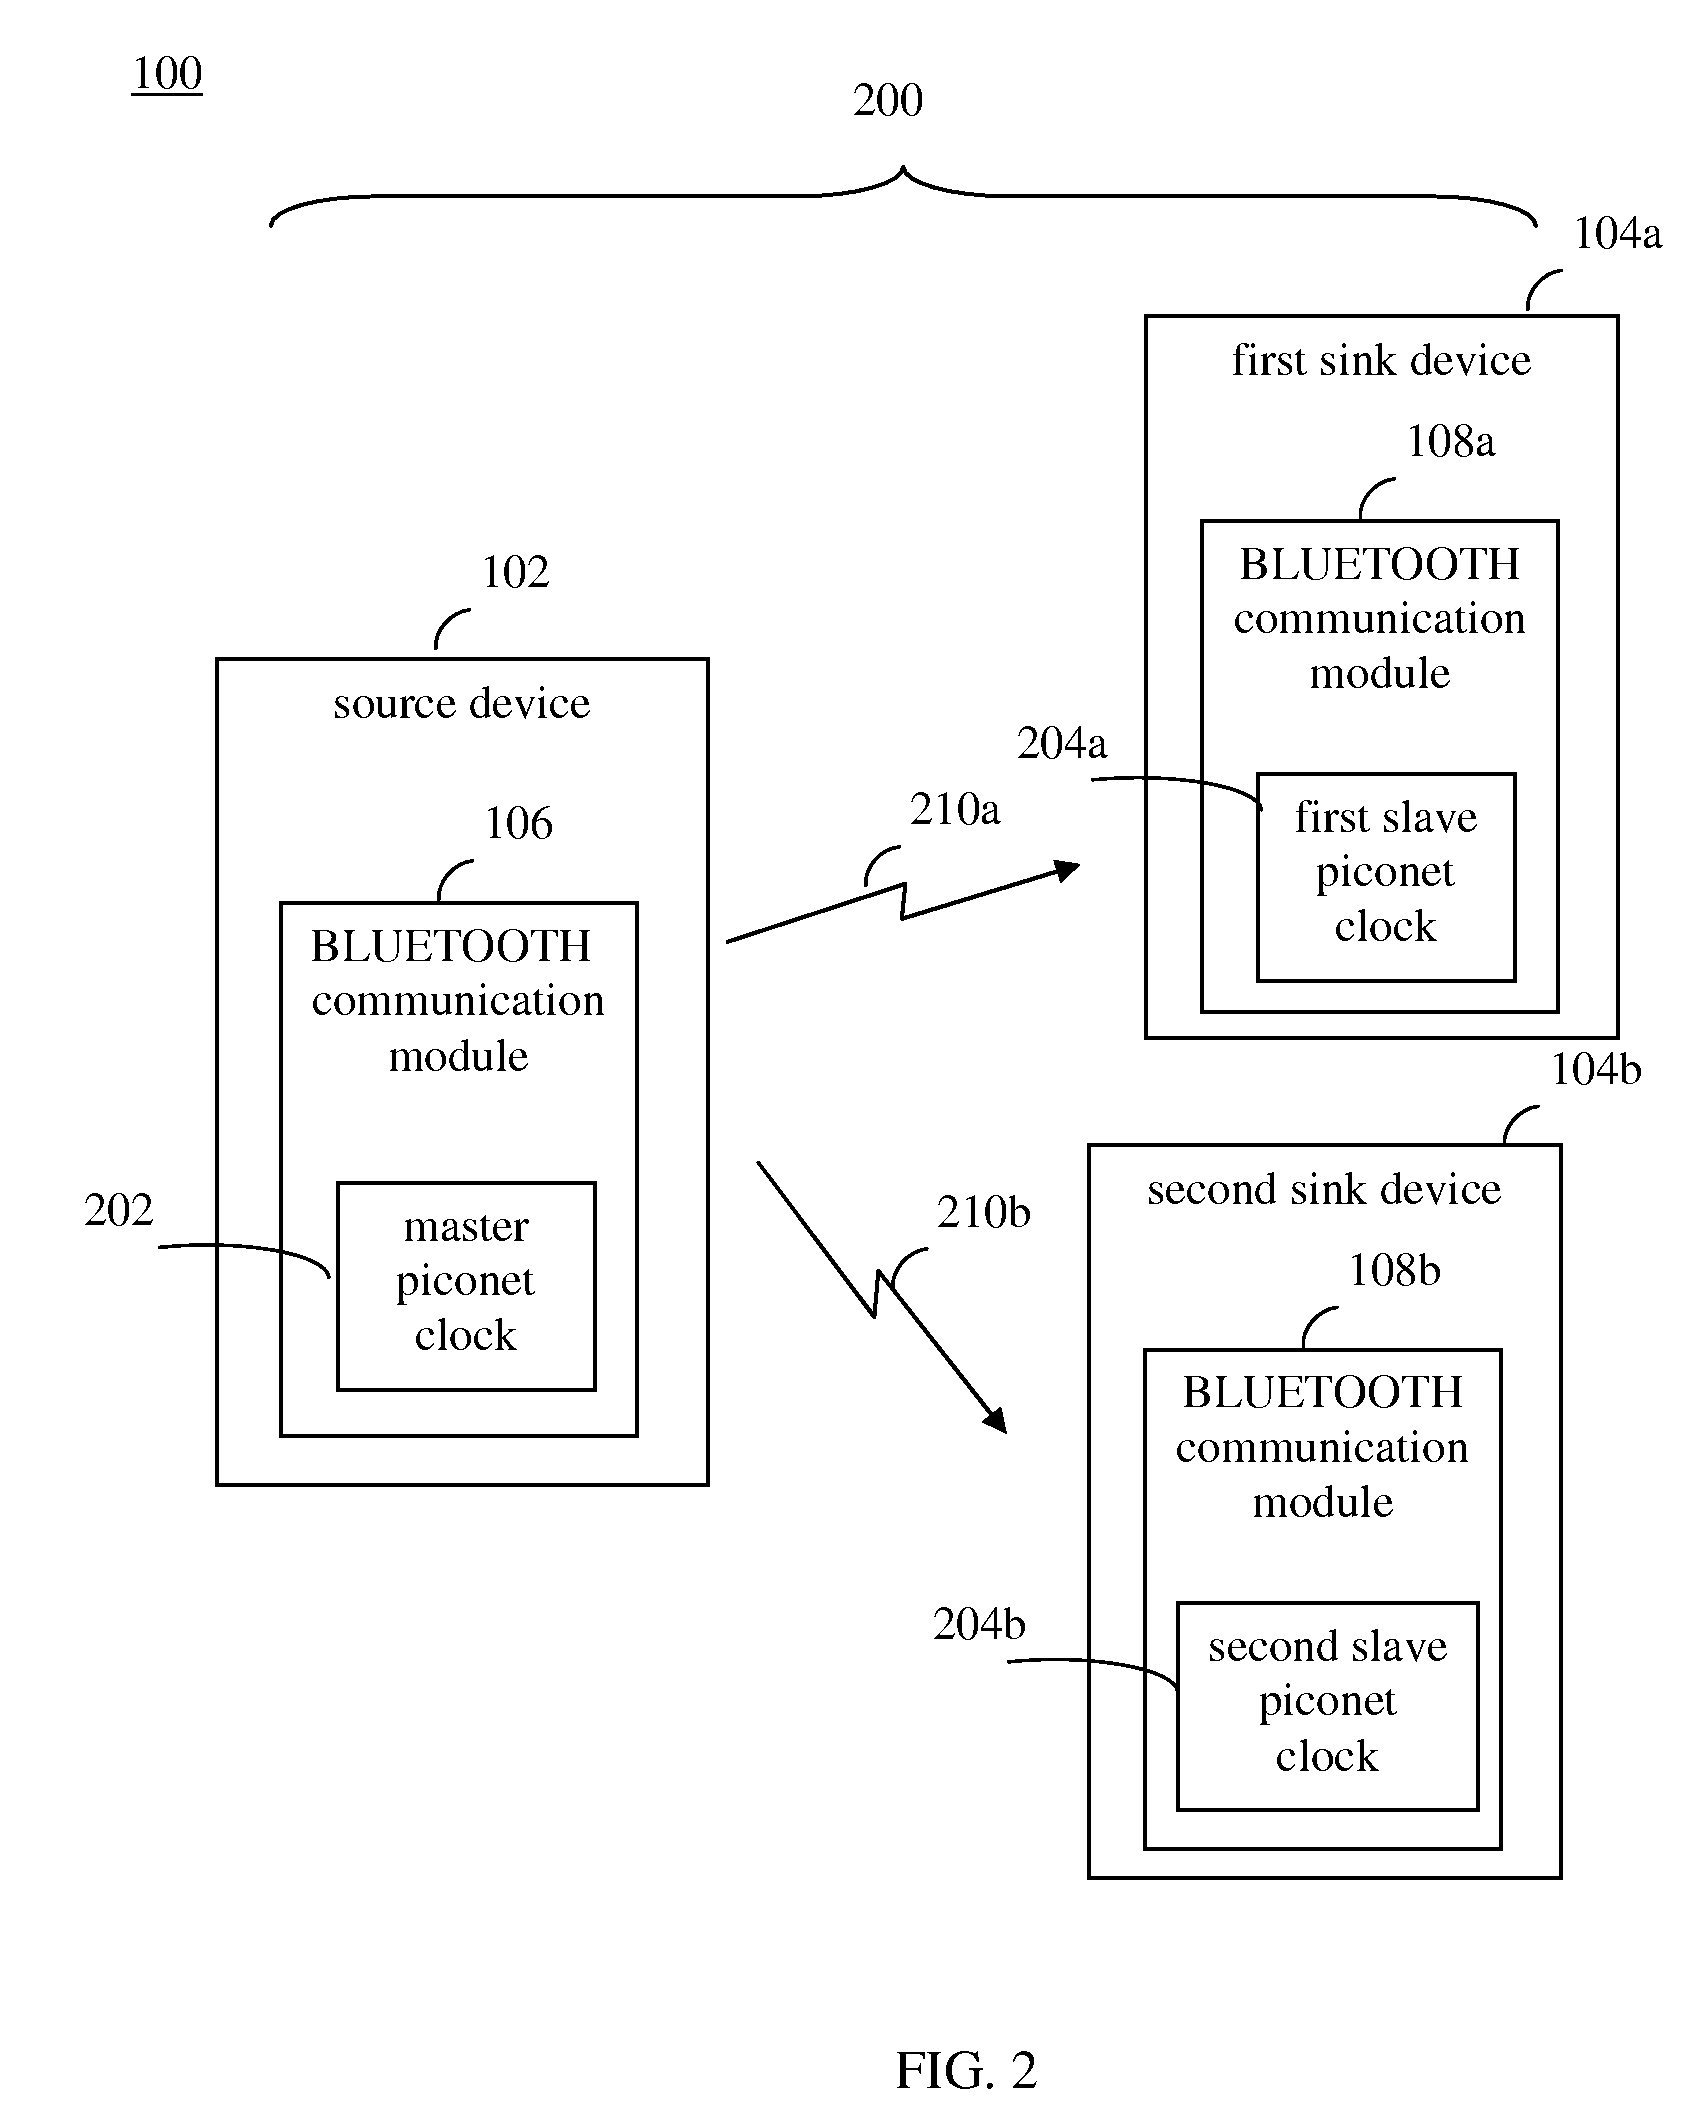 Synchronization of a split audio, video, or other data stream with separate sinks